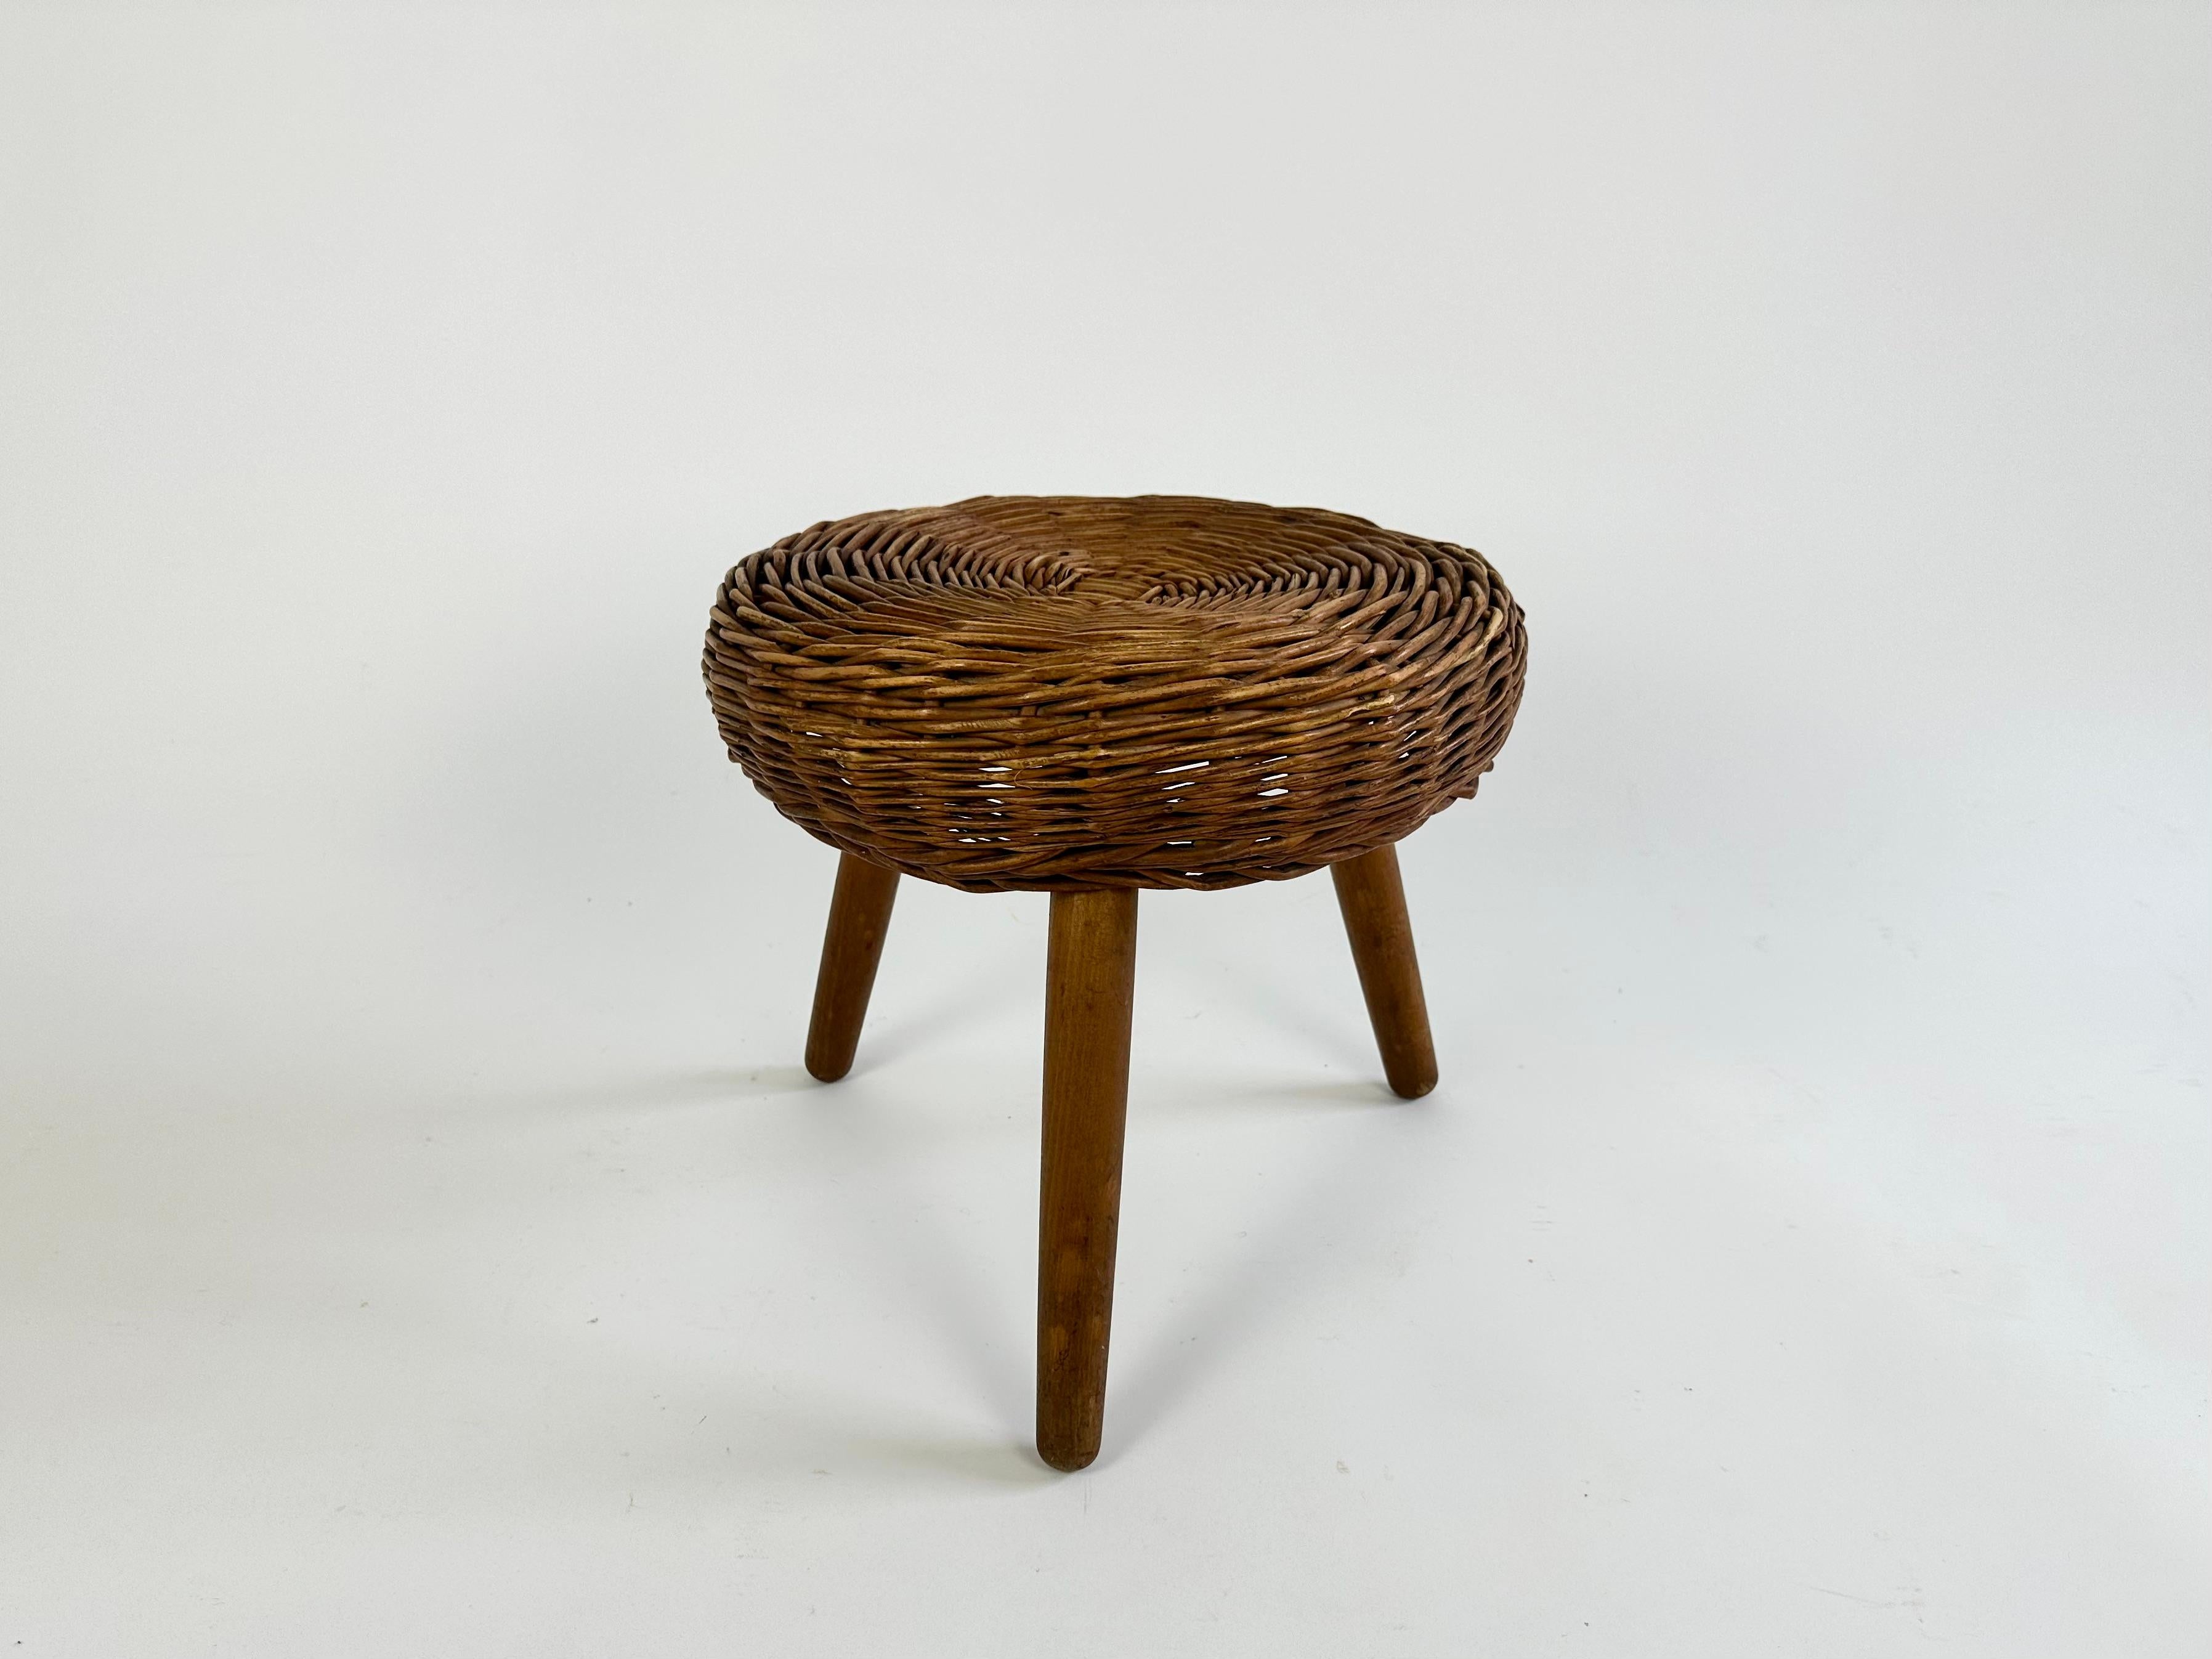 Vintage tripod stool in the manner of Tony Paul, circa 1950-60

Woven wicker circular seat on beech legs. The stool has aged nicely and has a great colour.

No repairs or restoration, cleaned ready for use.

Minor losses to the wicker weave, only